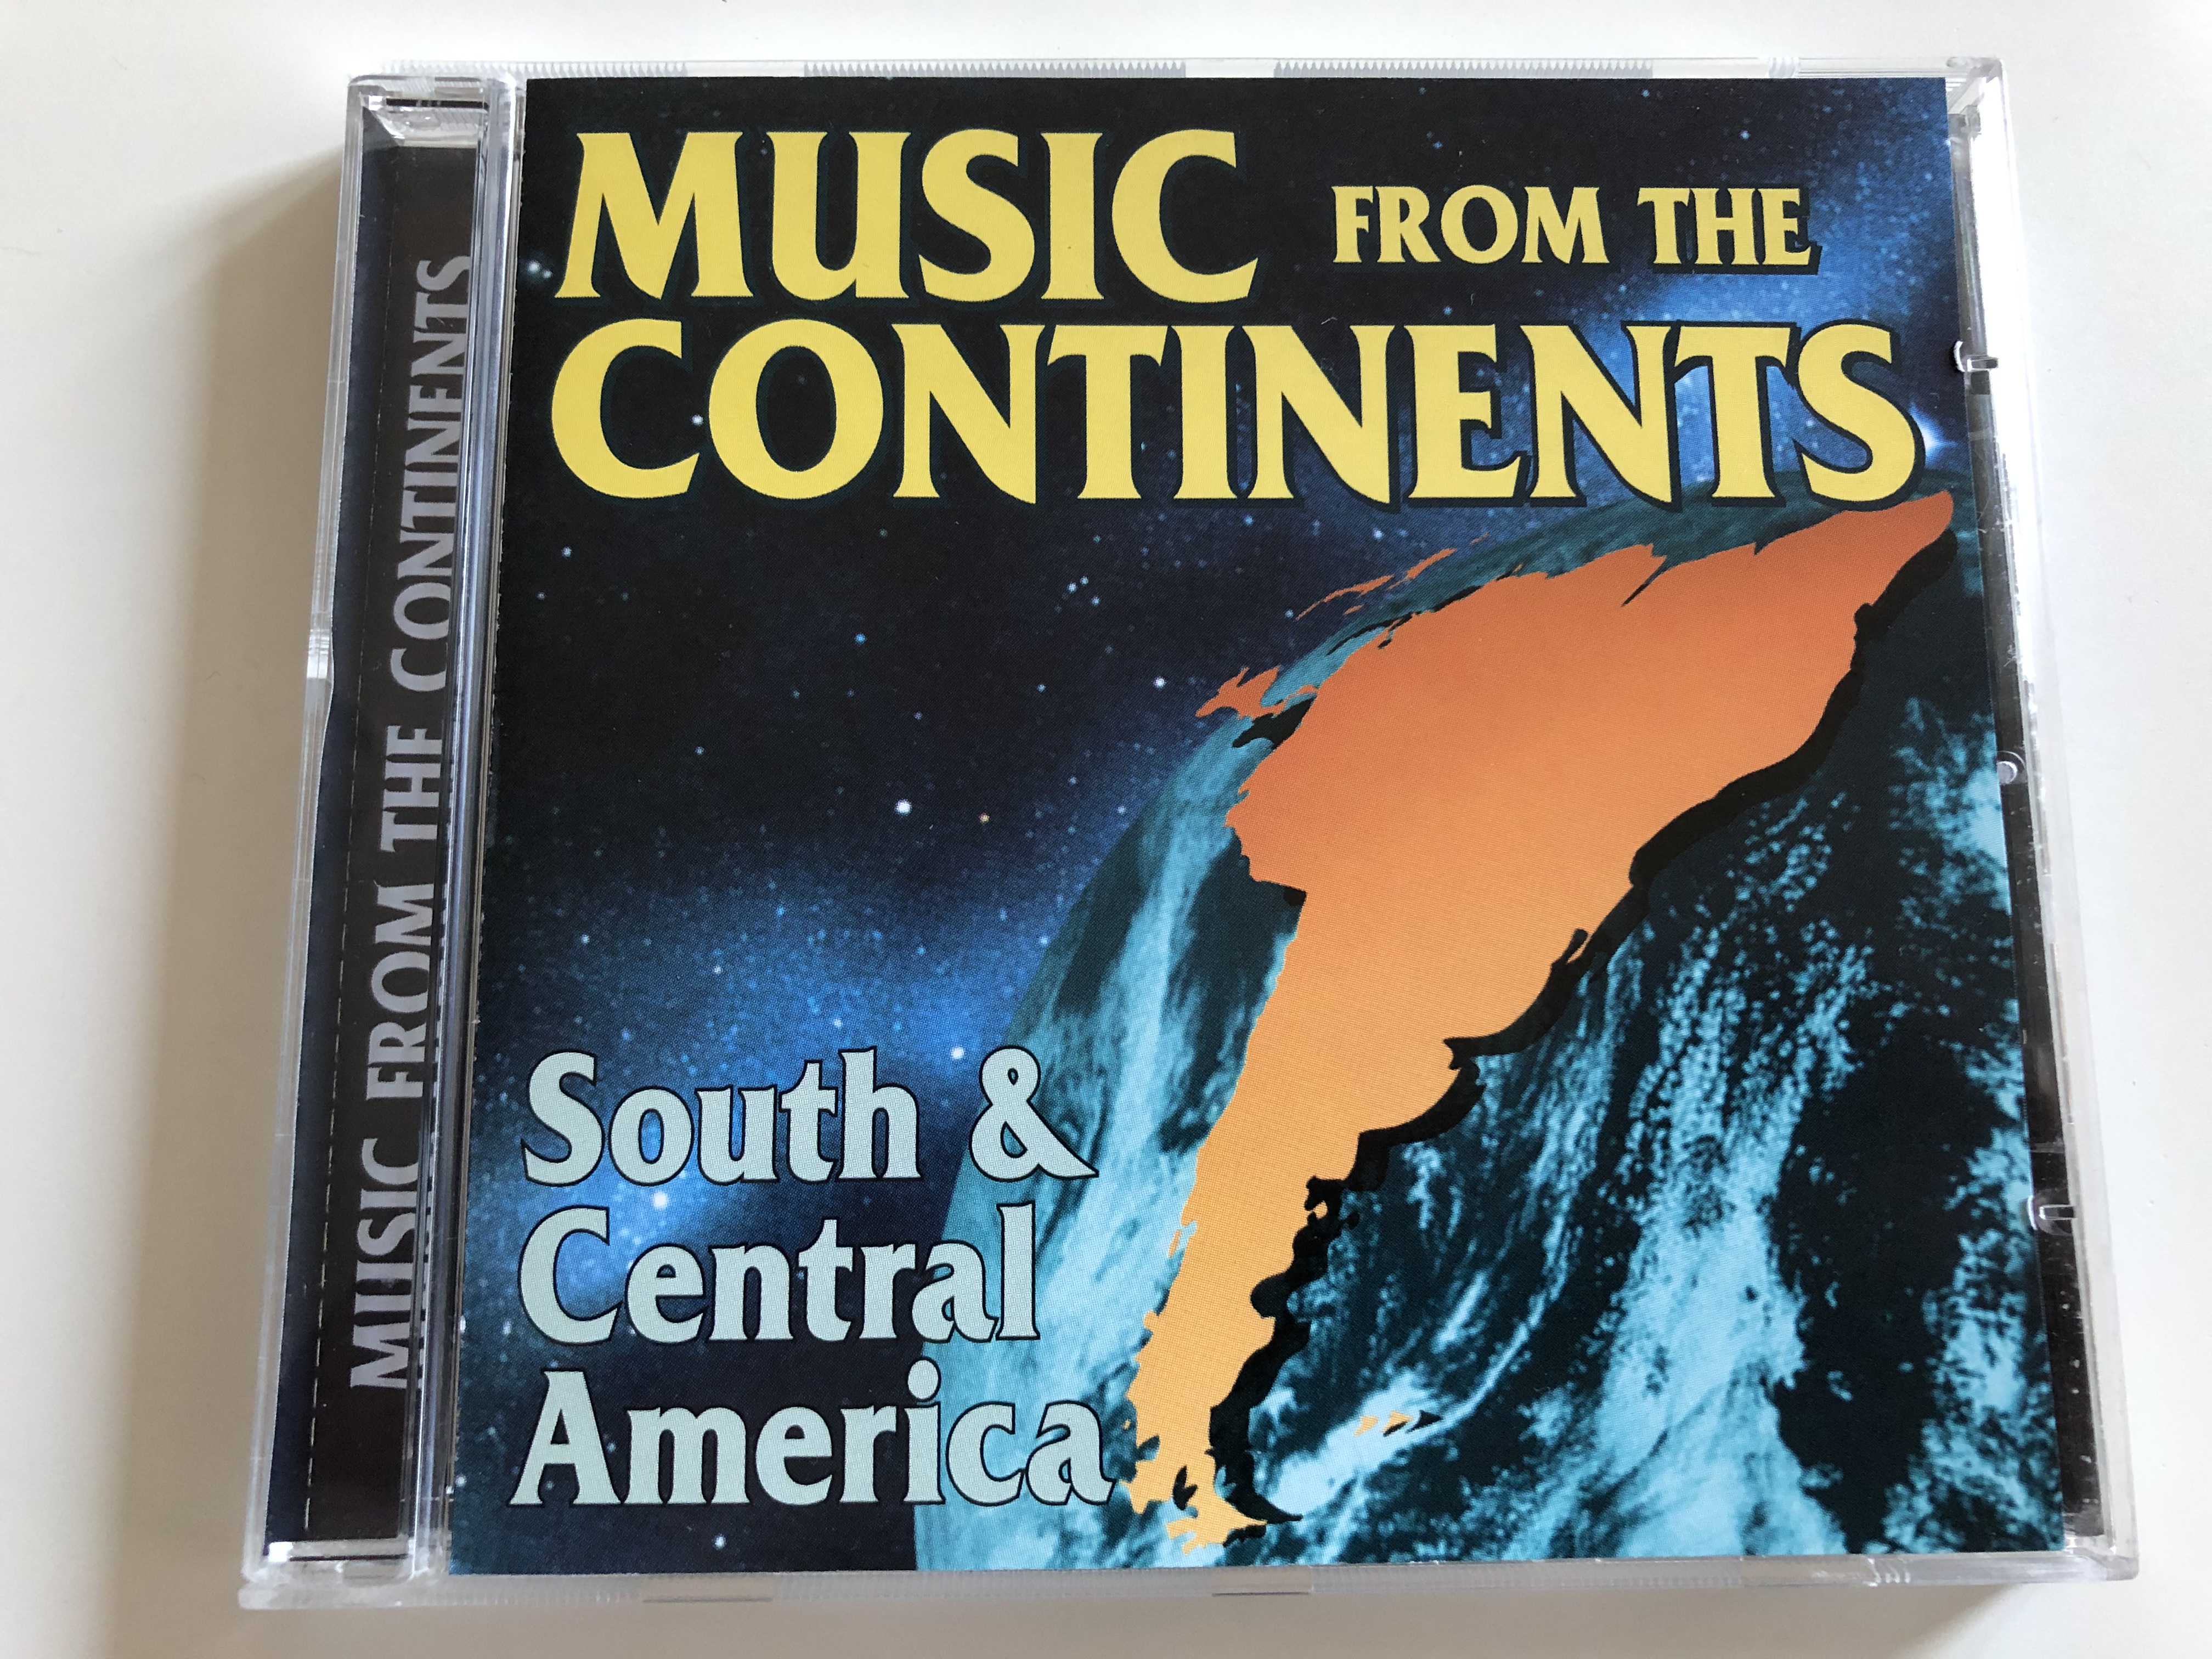 music-from-the-continents-south-central-america-galaxy-music-ltd.-audio-cd-1998-3887912-1-.jpg